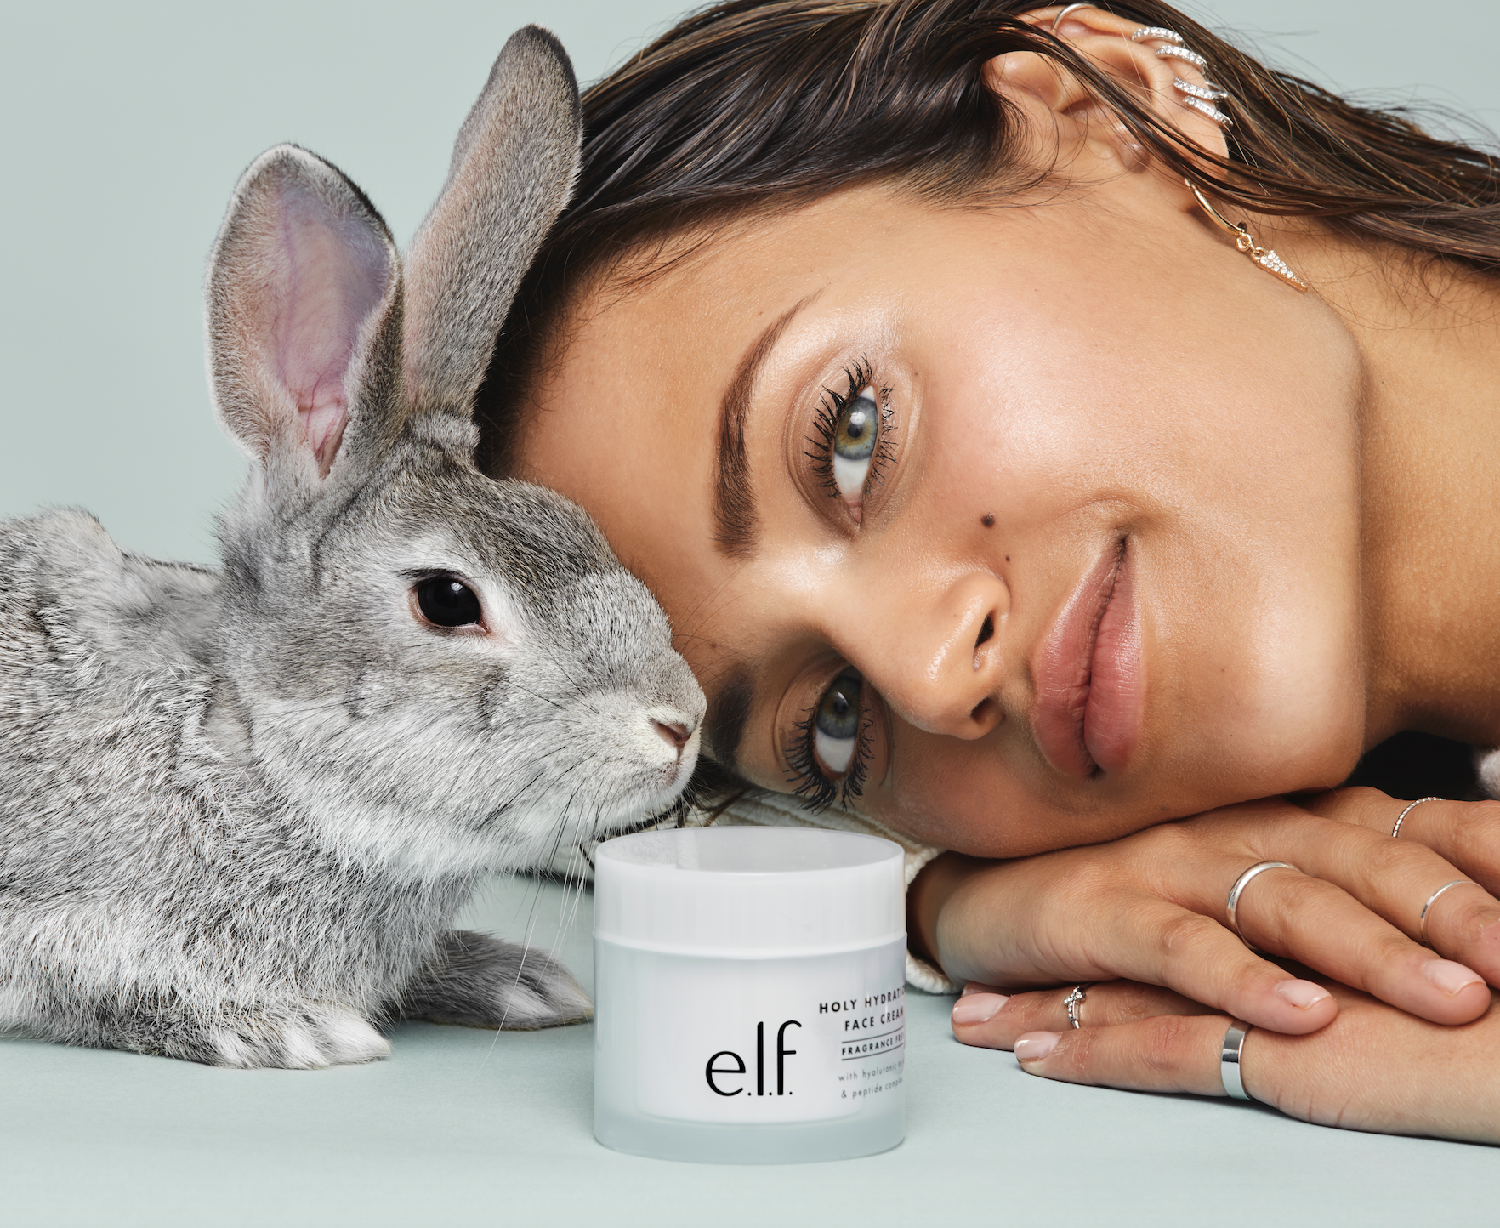 e.l.f. Beauty stands with every eye, lip, face and paw and is committed to inclusive, accessible, cruelty-free beauty.